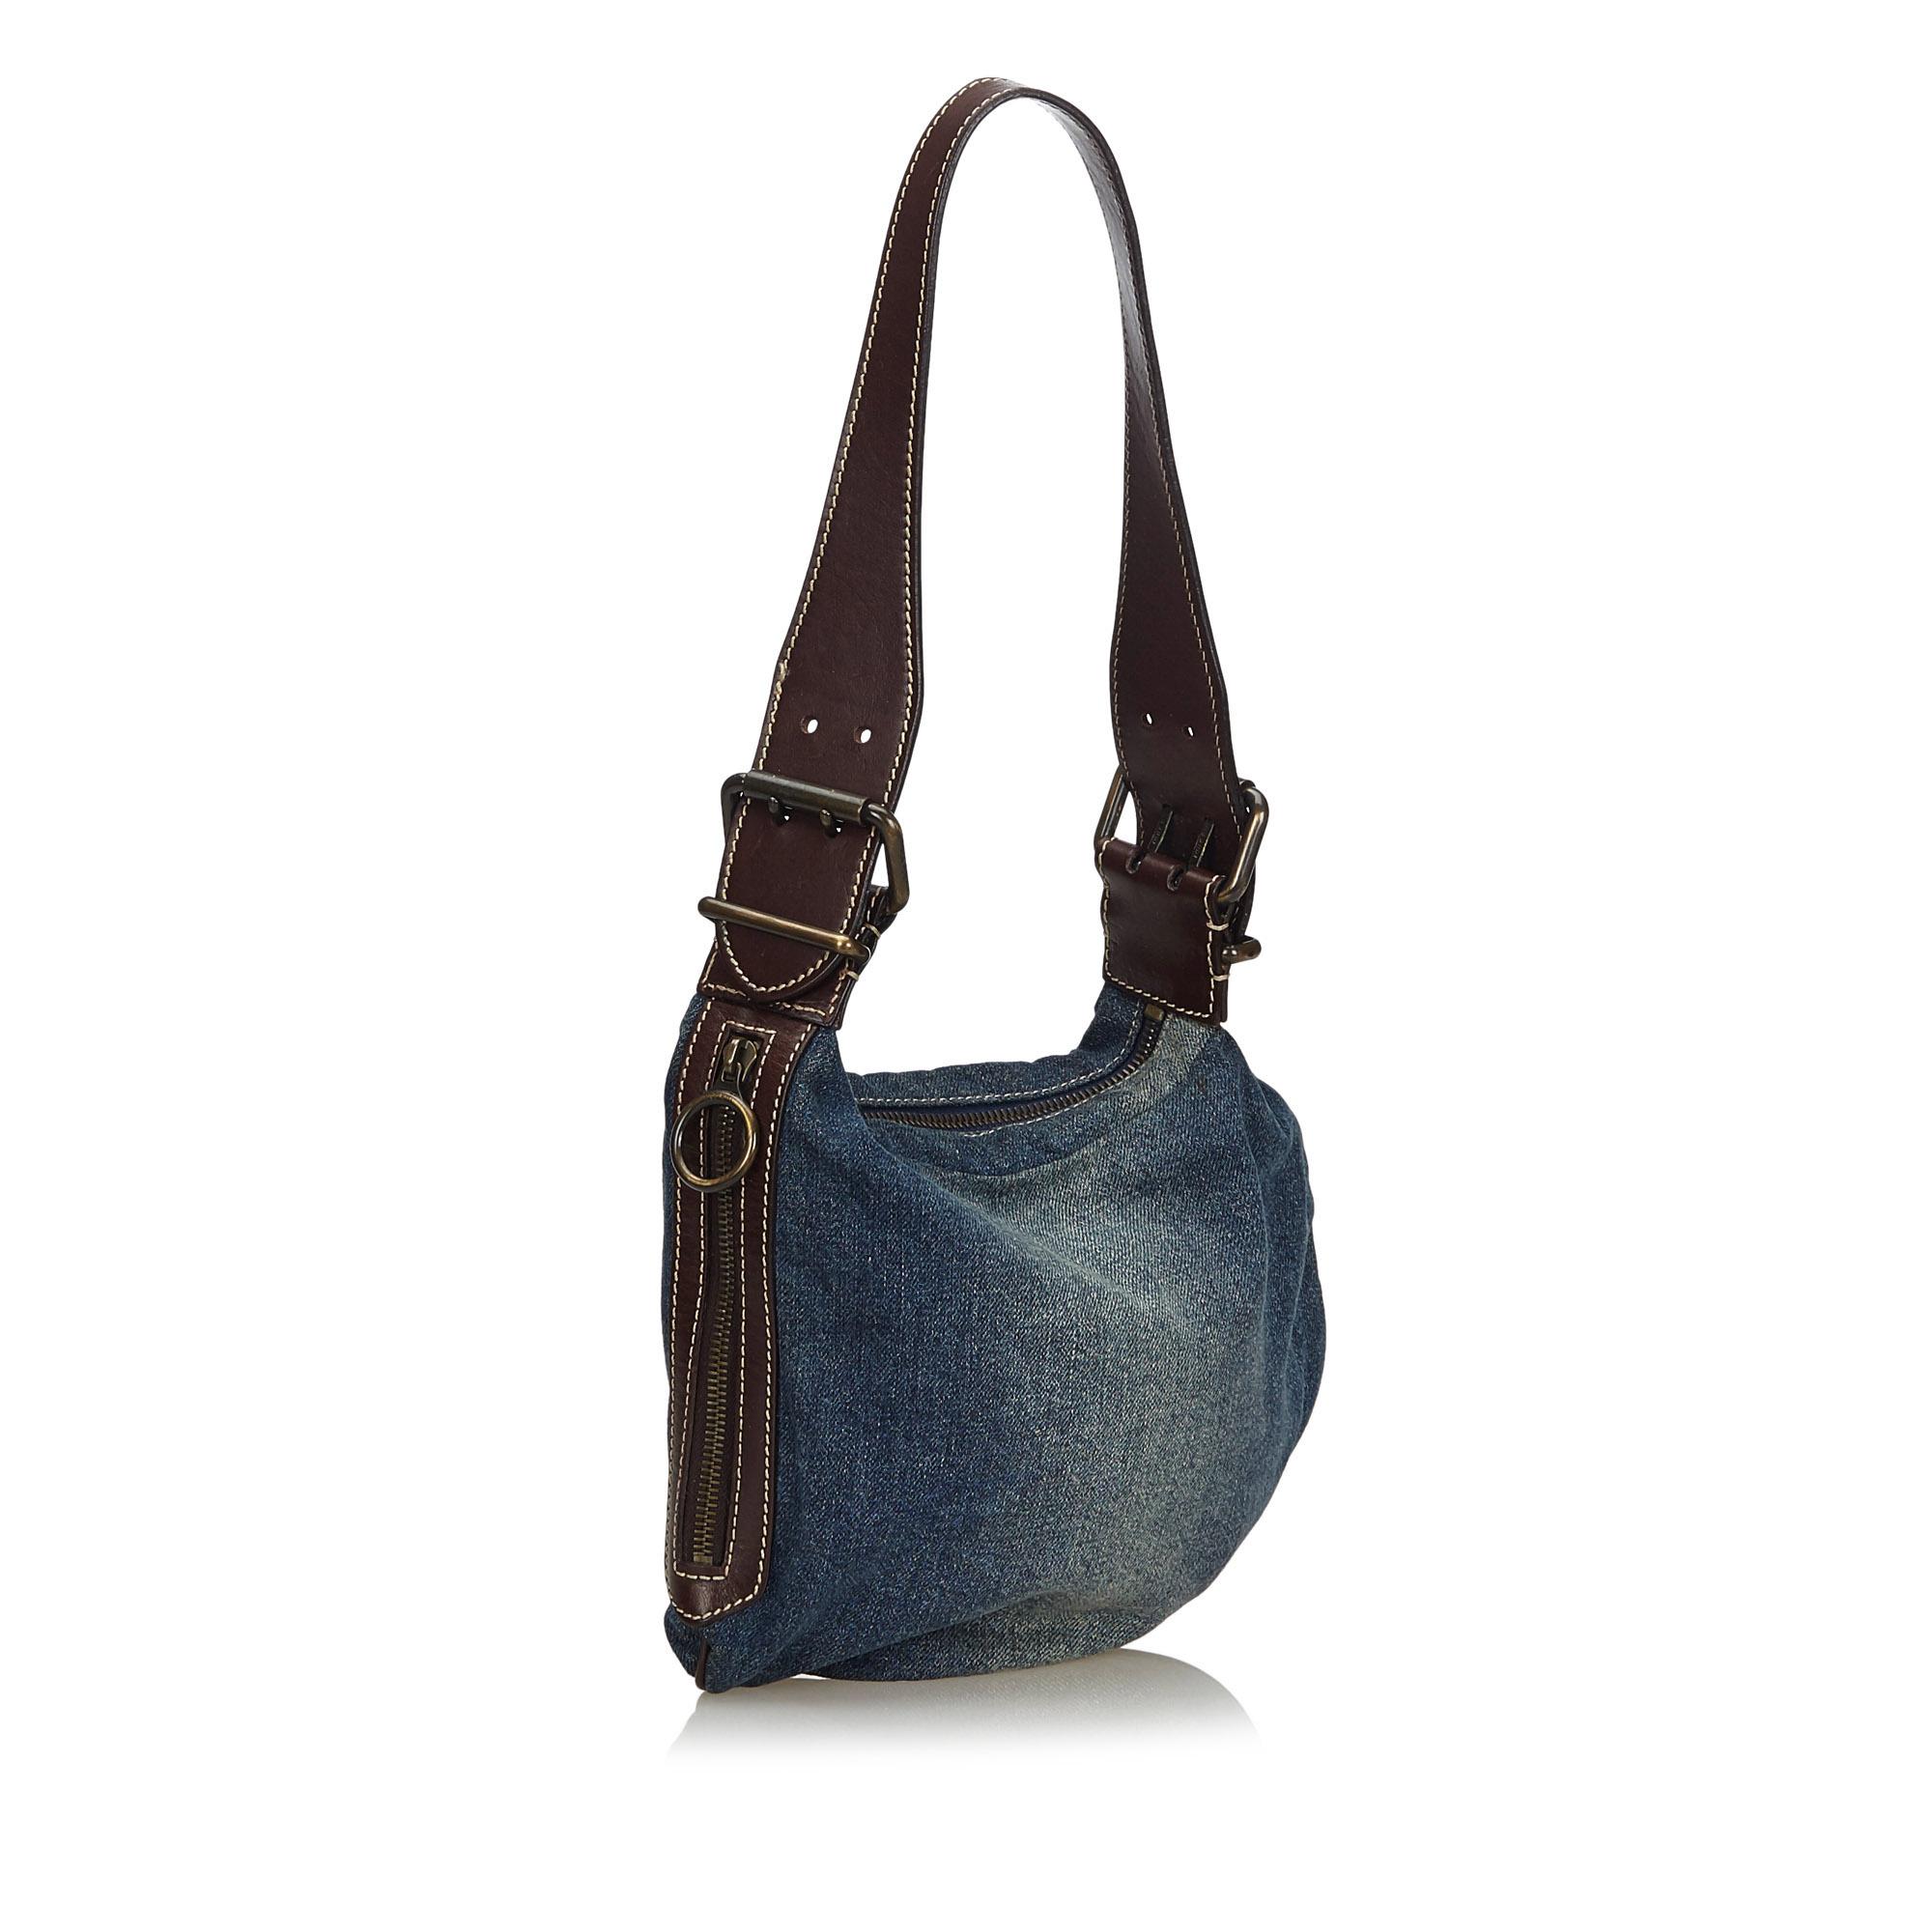 The Oyster bag features a denim body, flat leather strap, and a top zip closure. It carries as AB condition rating.

Inclusions: 
Dust Bag

Dimensions:
Length: 20.00 cm
Width: 25.00 cm
Depth: 2.00 cm
Shoulder Drop: 30.00 cm

Material: Fabric x Denim